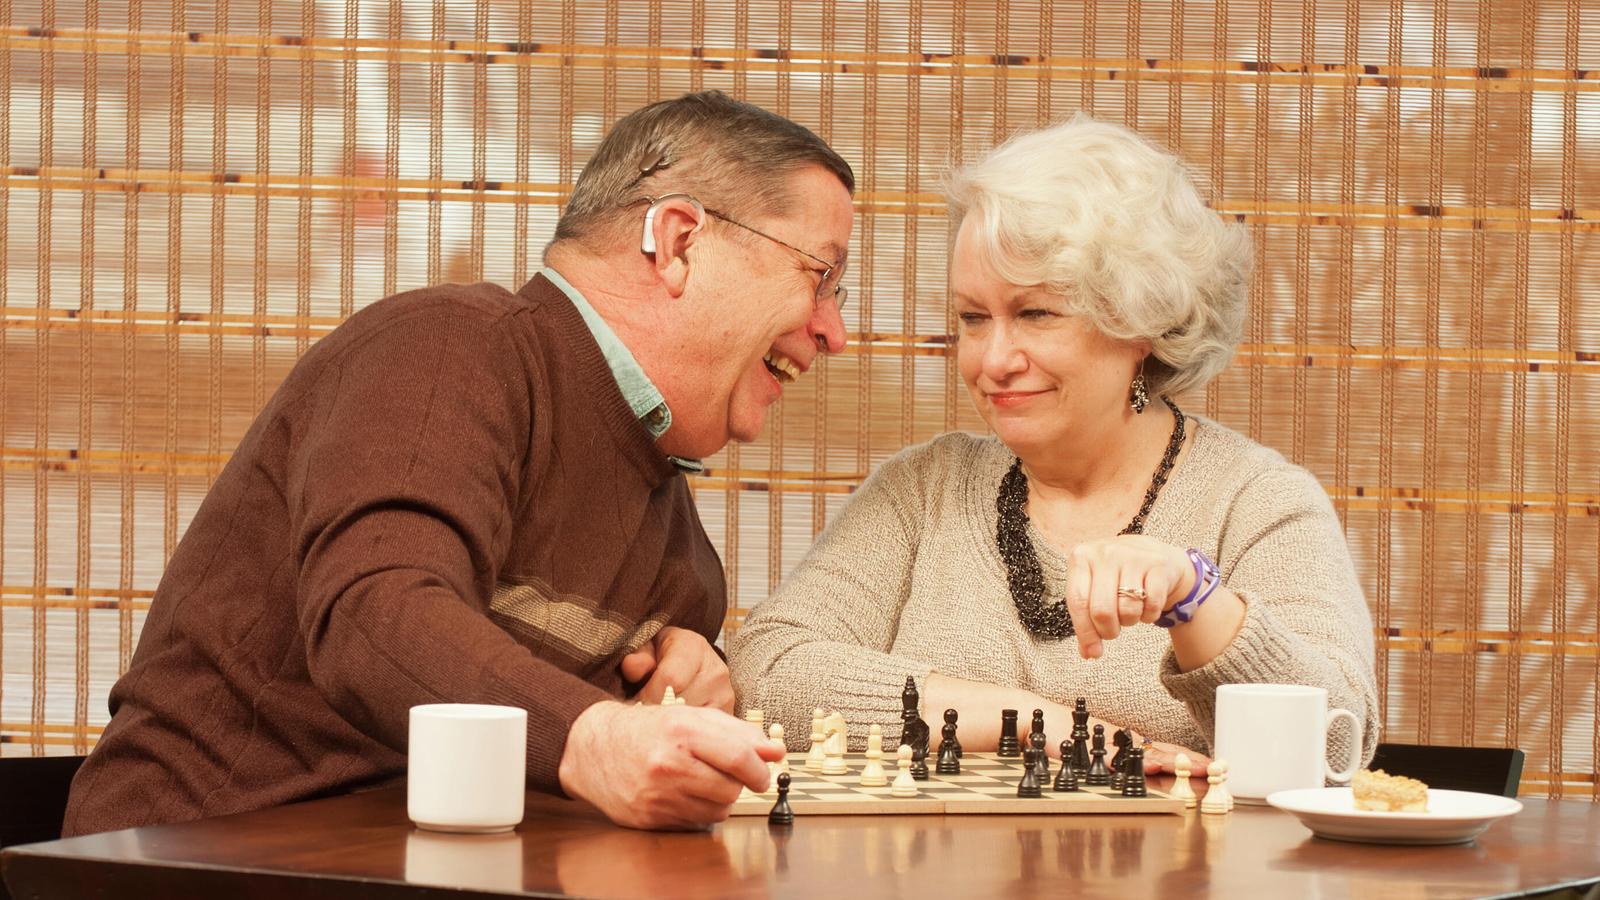 Recipient Bill and wife Pam having fun playing chess game